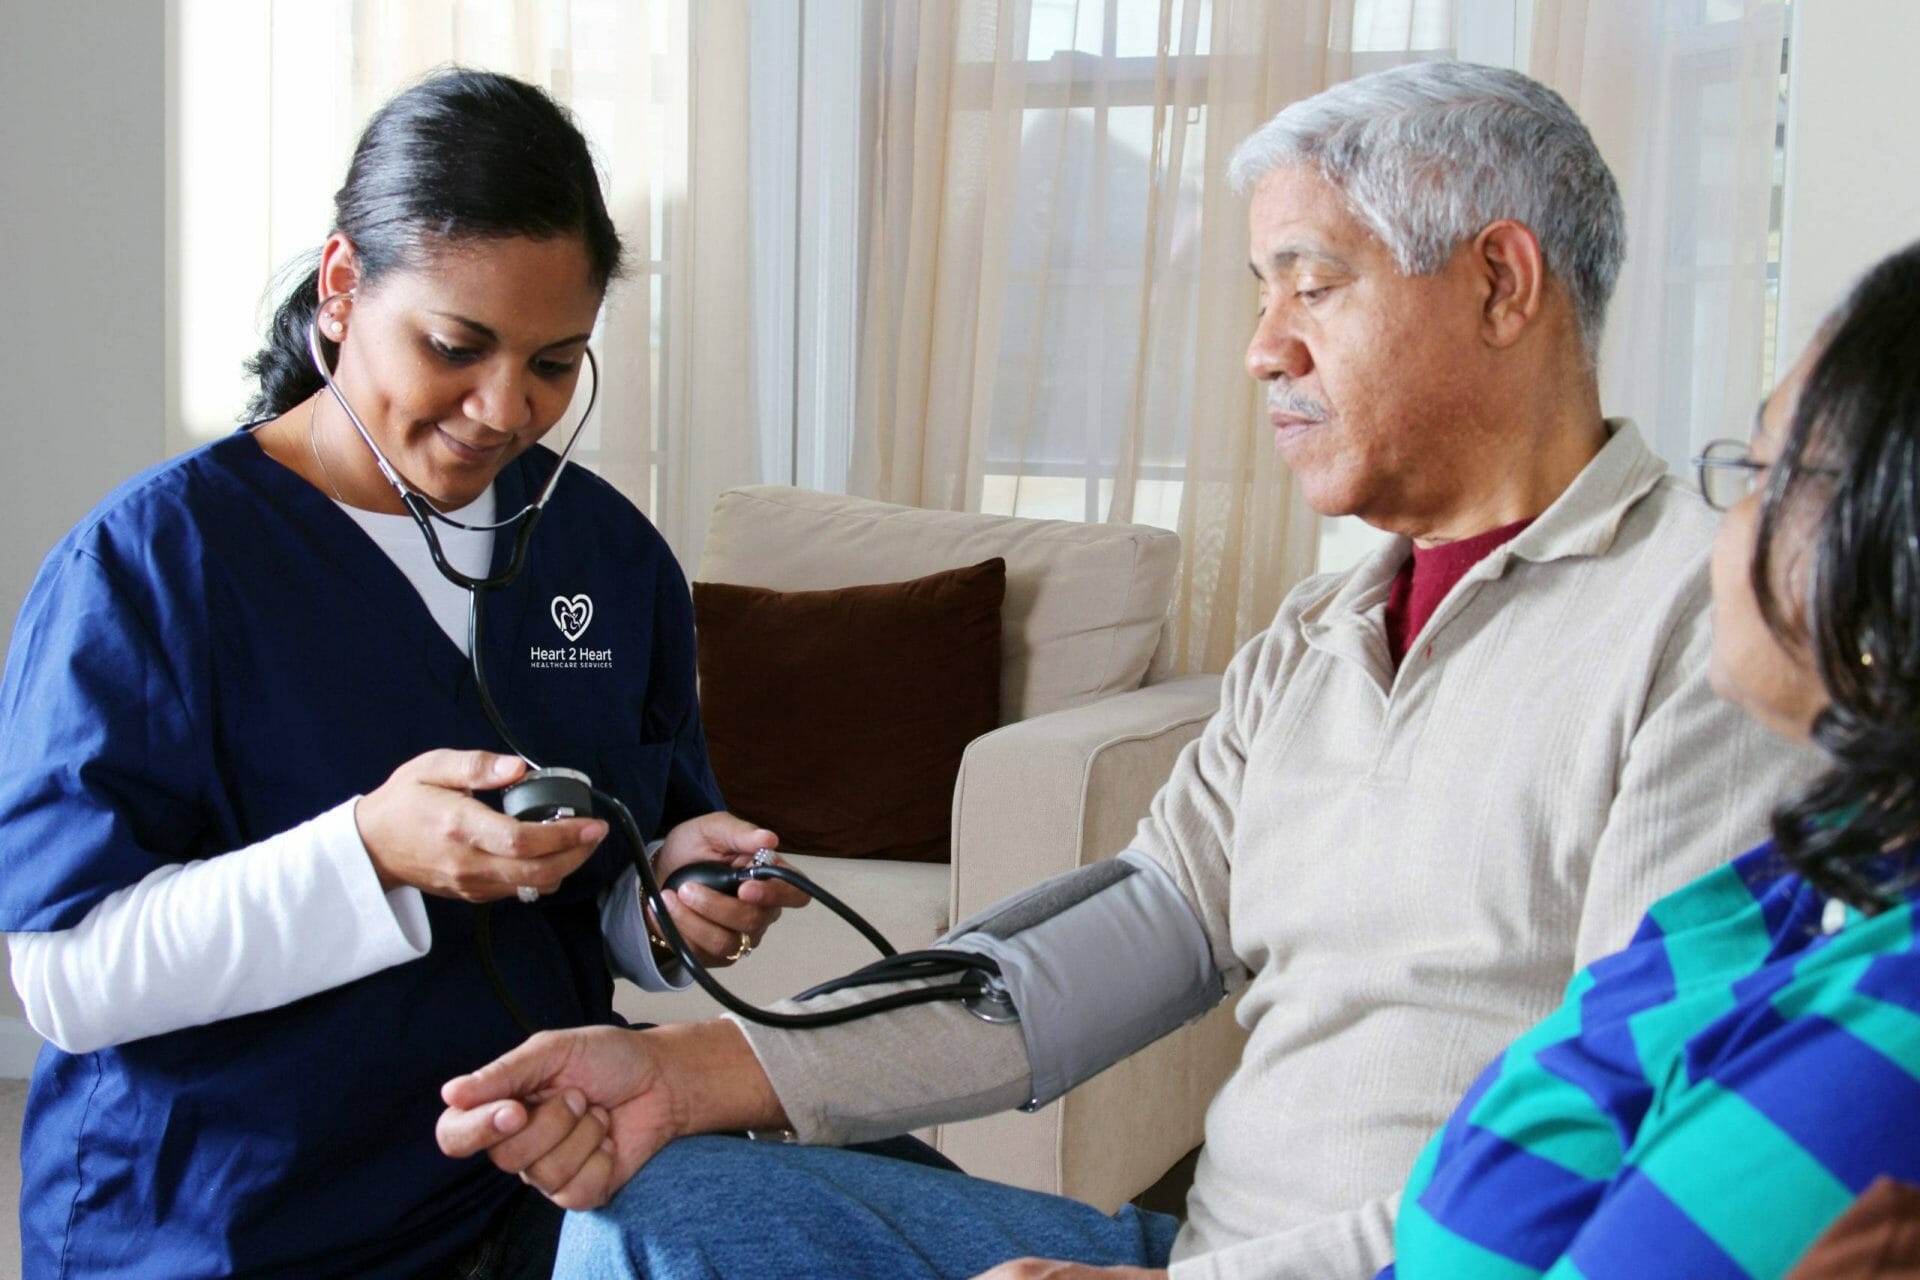 in home health care services for seniors Personalized Care Personalized health Care compassionate care providers senior home health care senior home health care Frisco senior home health care in Frisco senior home health care in texas senior home health care in USA COMPREHENSIVE HOME HEALTH CARE​